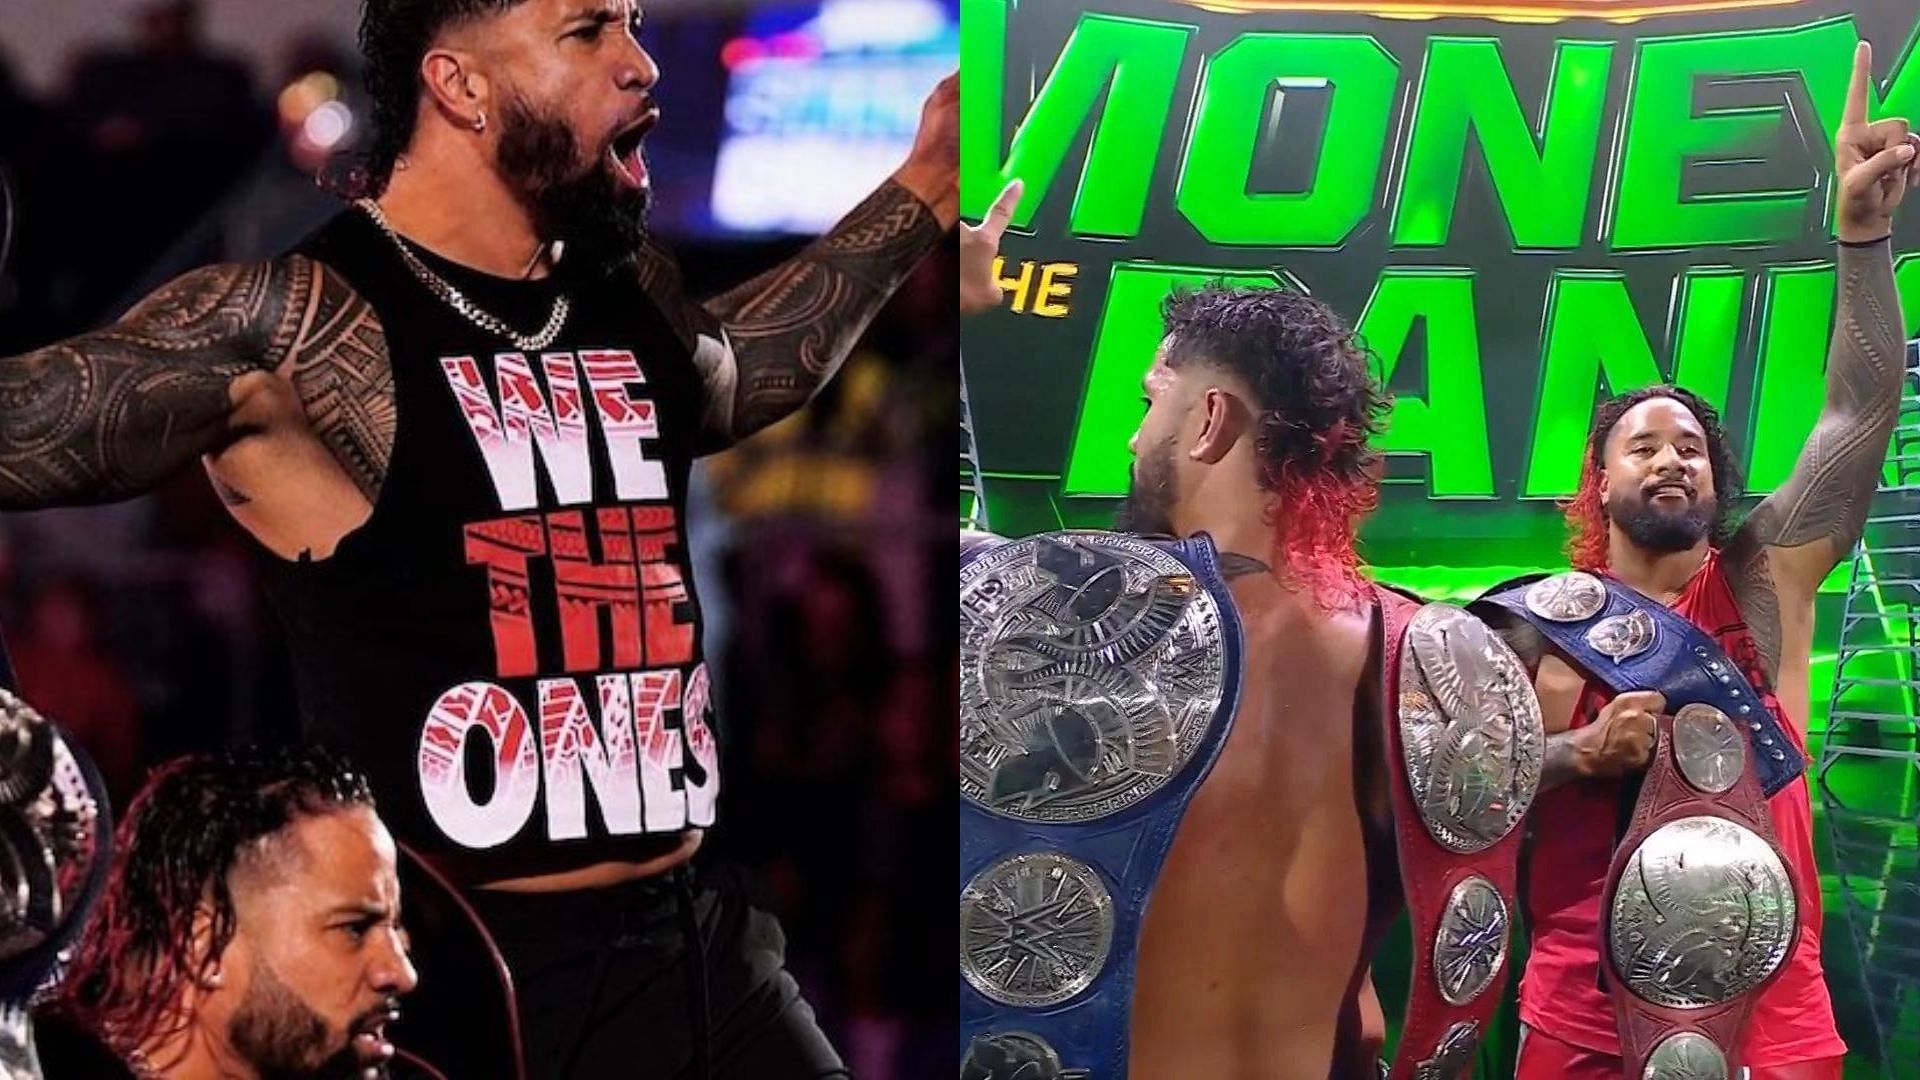 The Usos have been dominant as the tag team champions